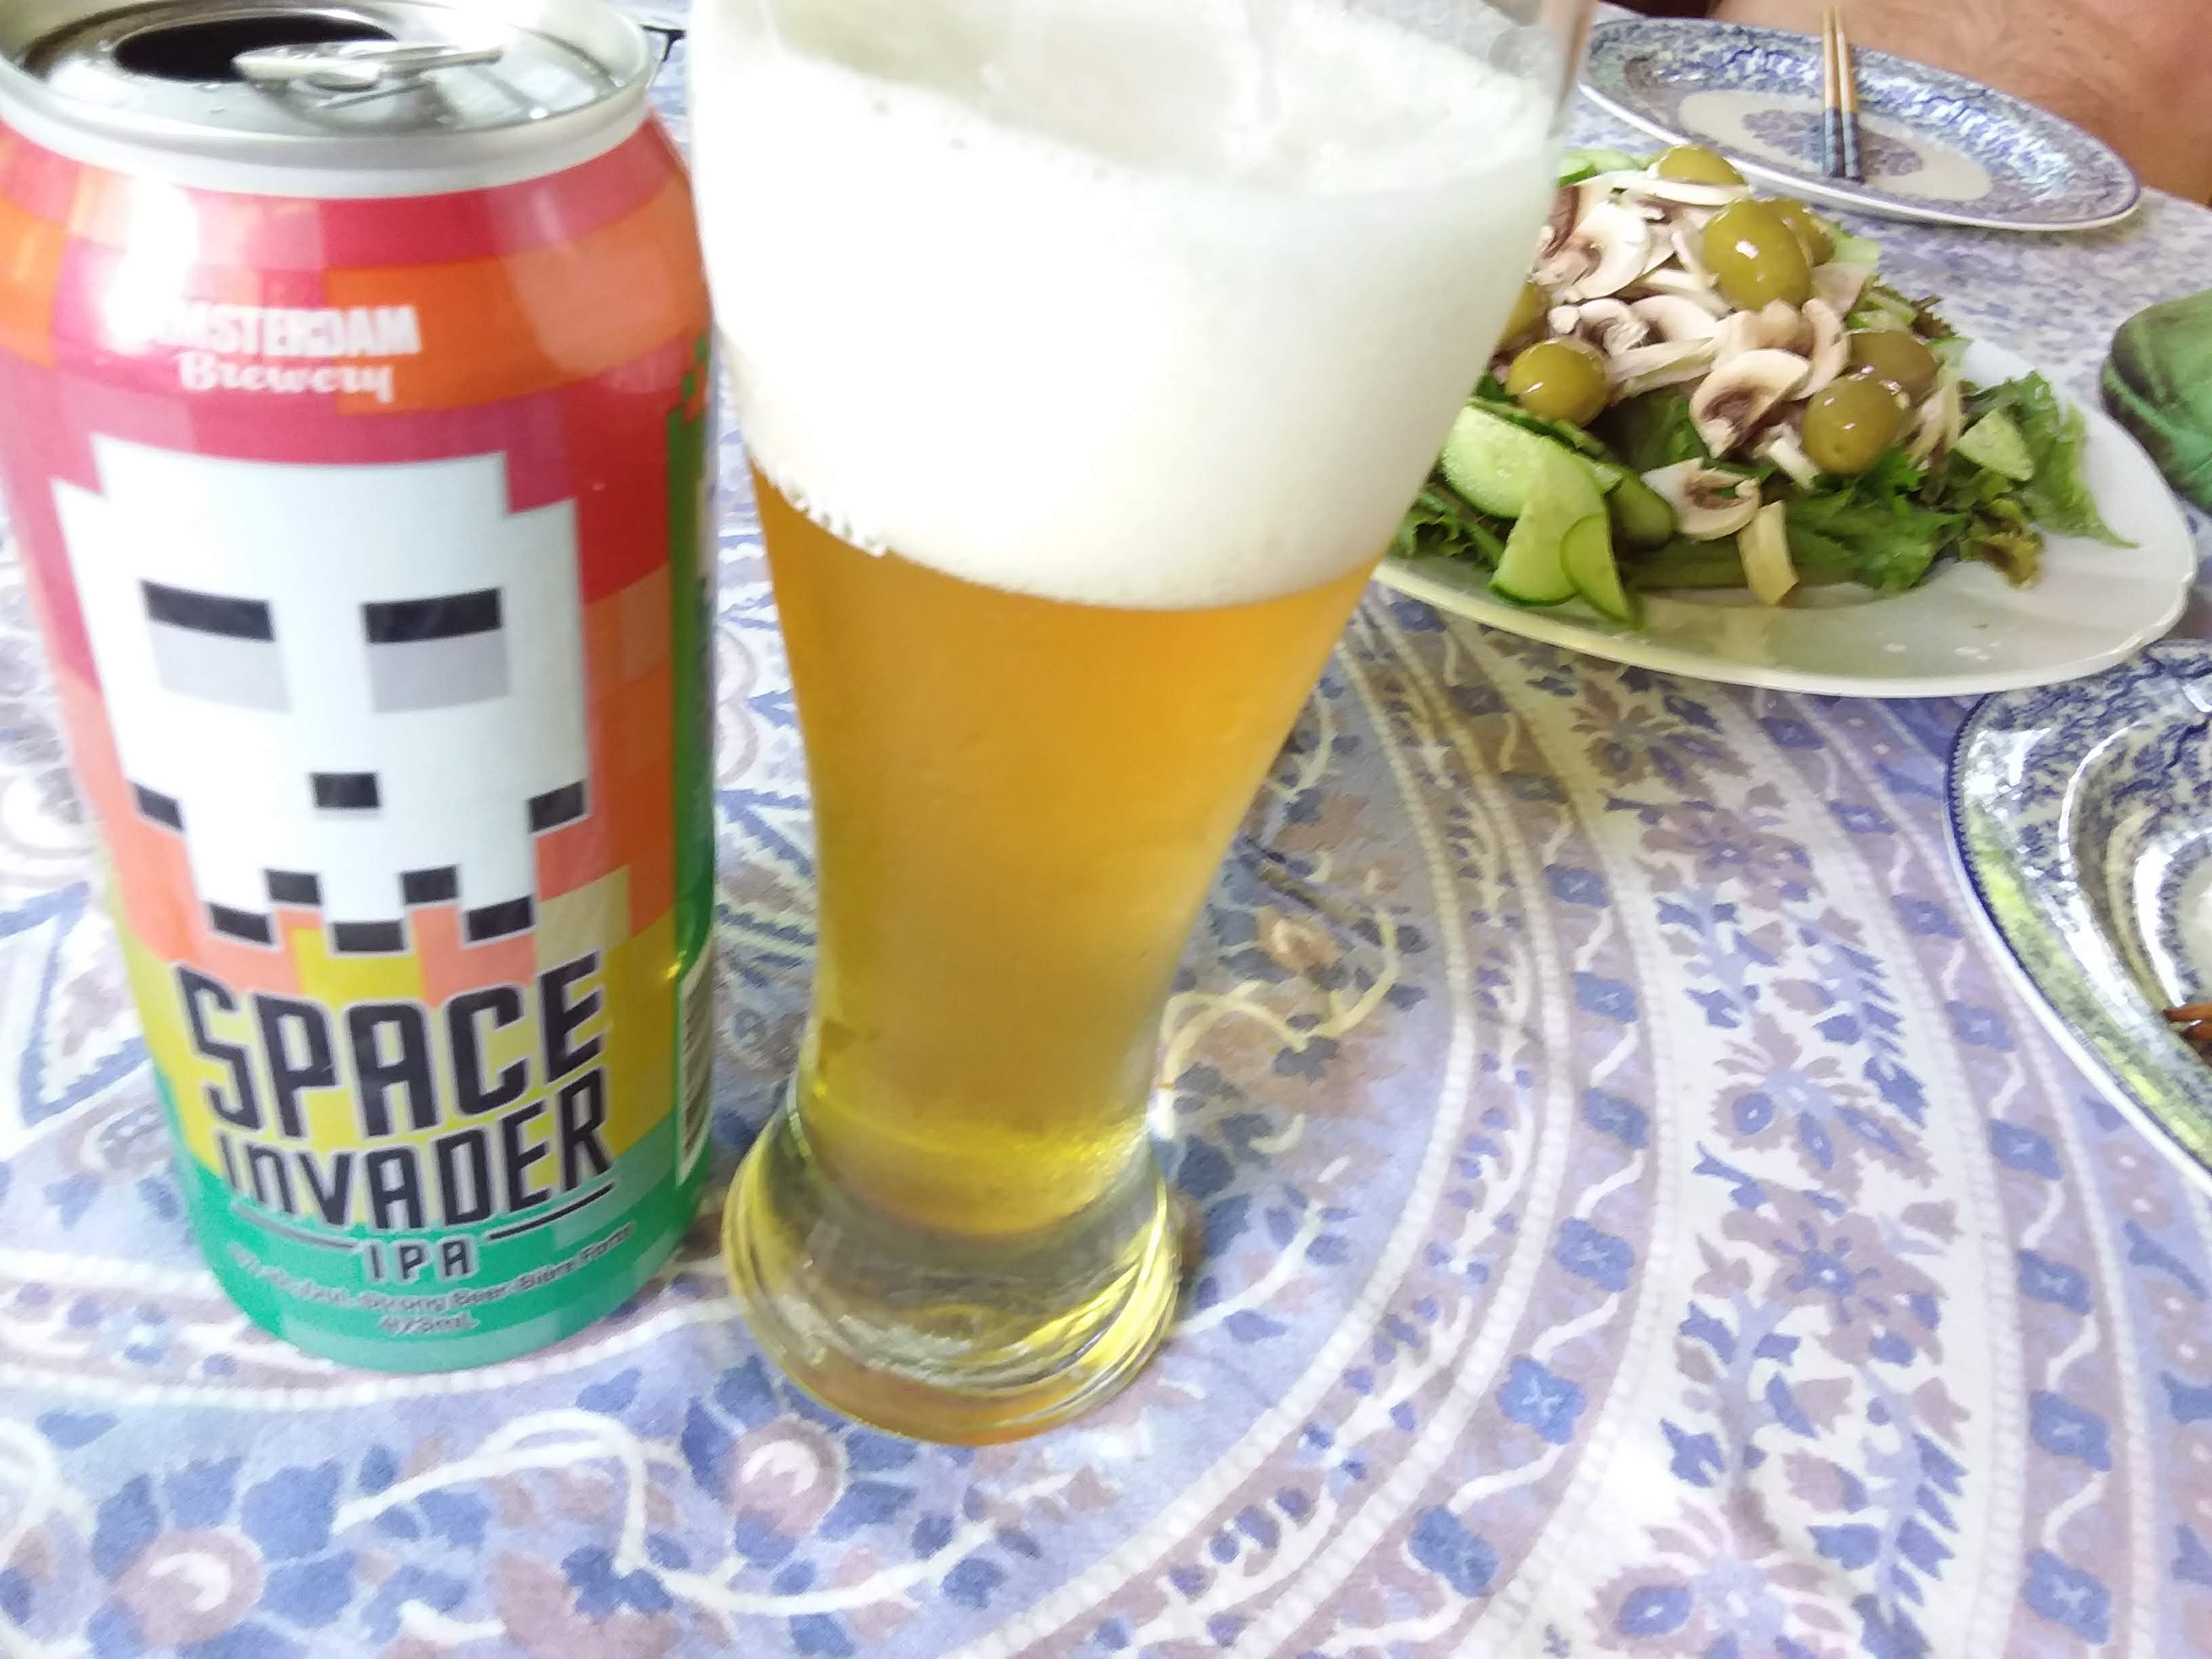 Space Invader IPA